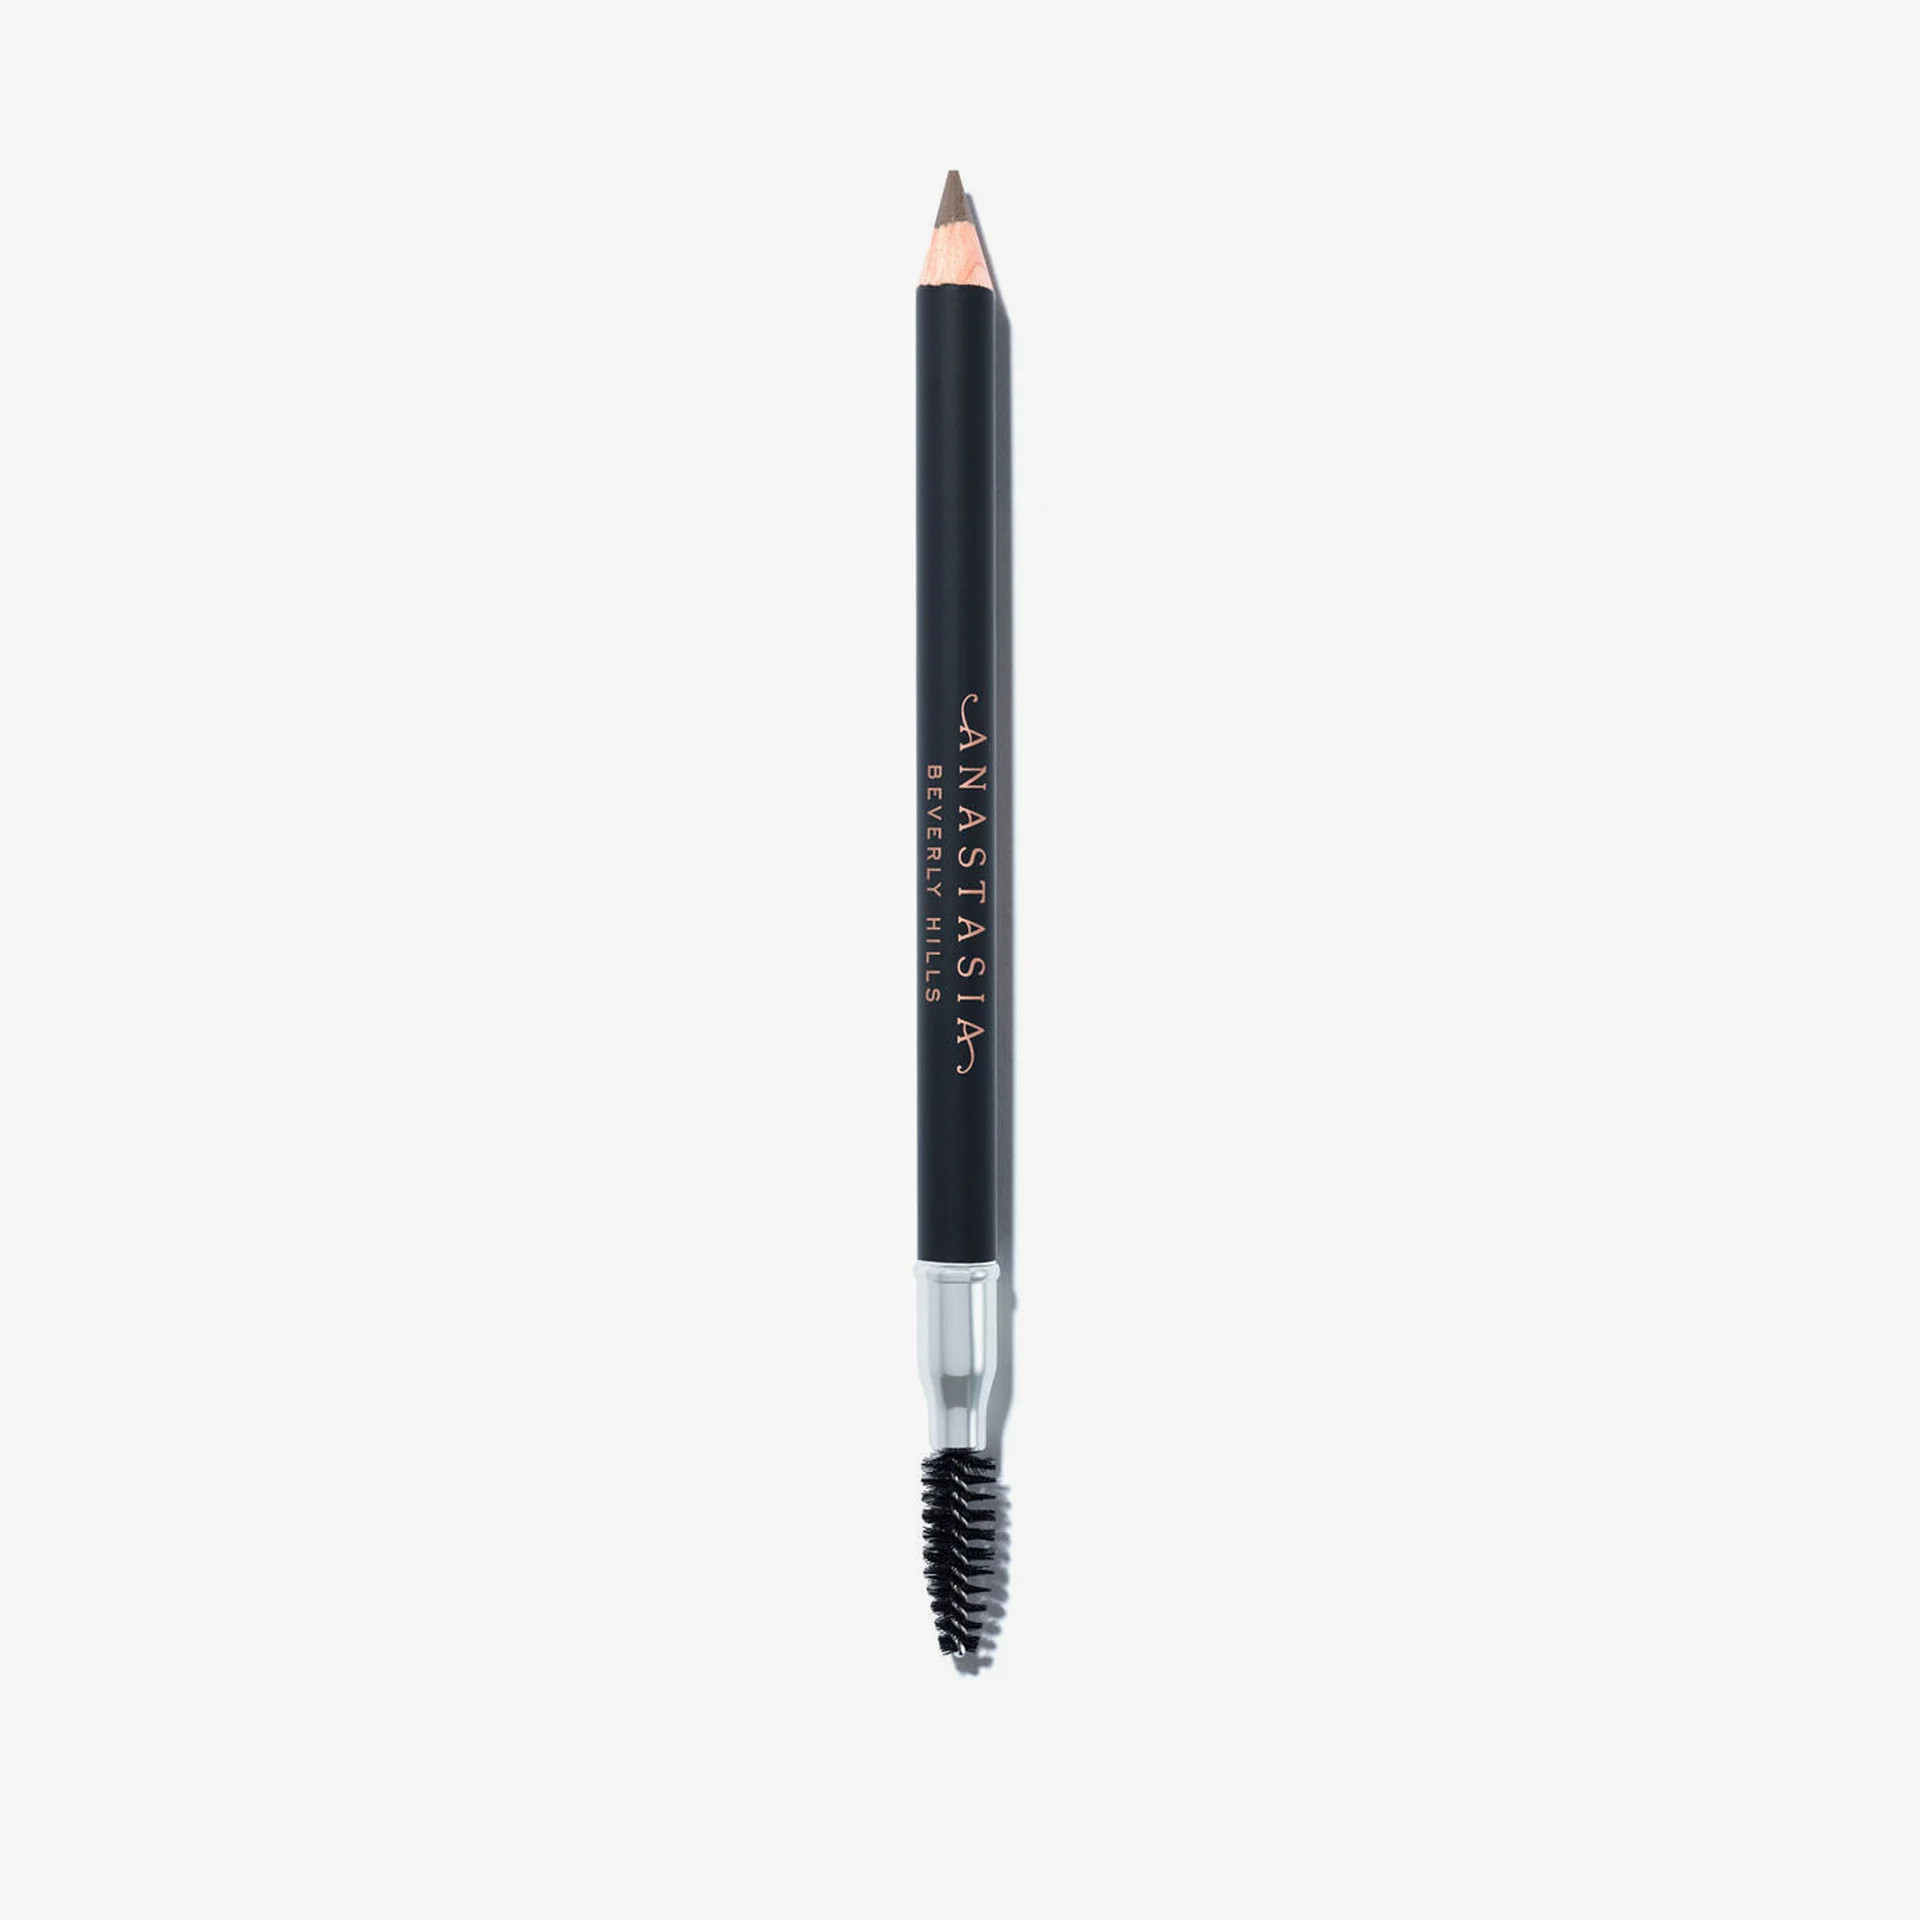 Perfect Brow Pencil | Anastasia Beverly Hills | Anastasia Beverly Hills